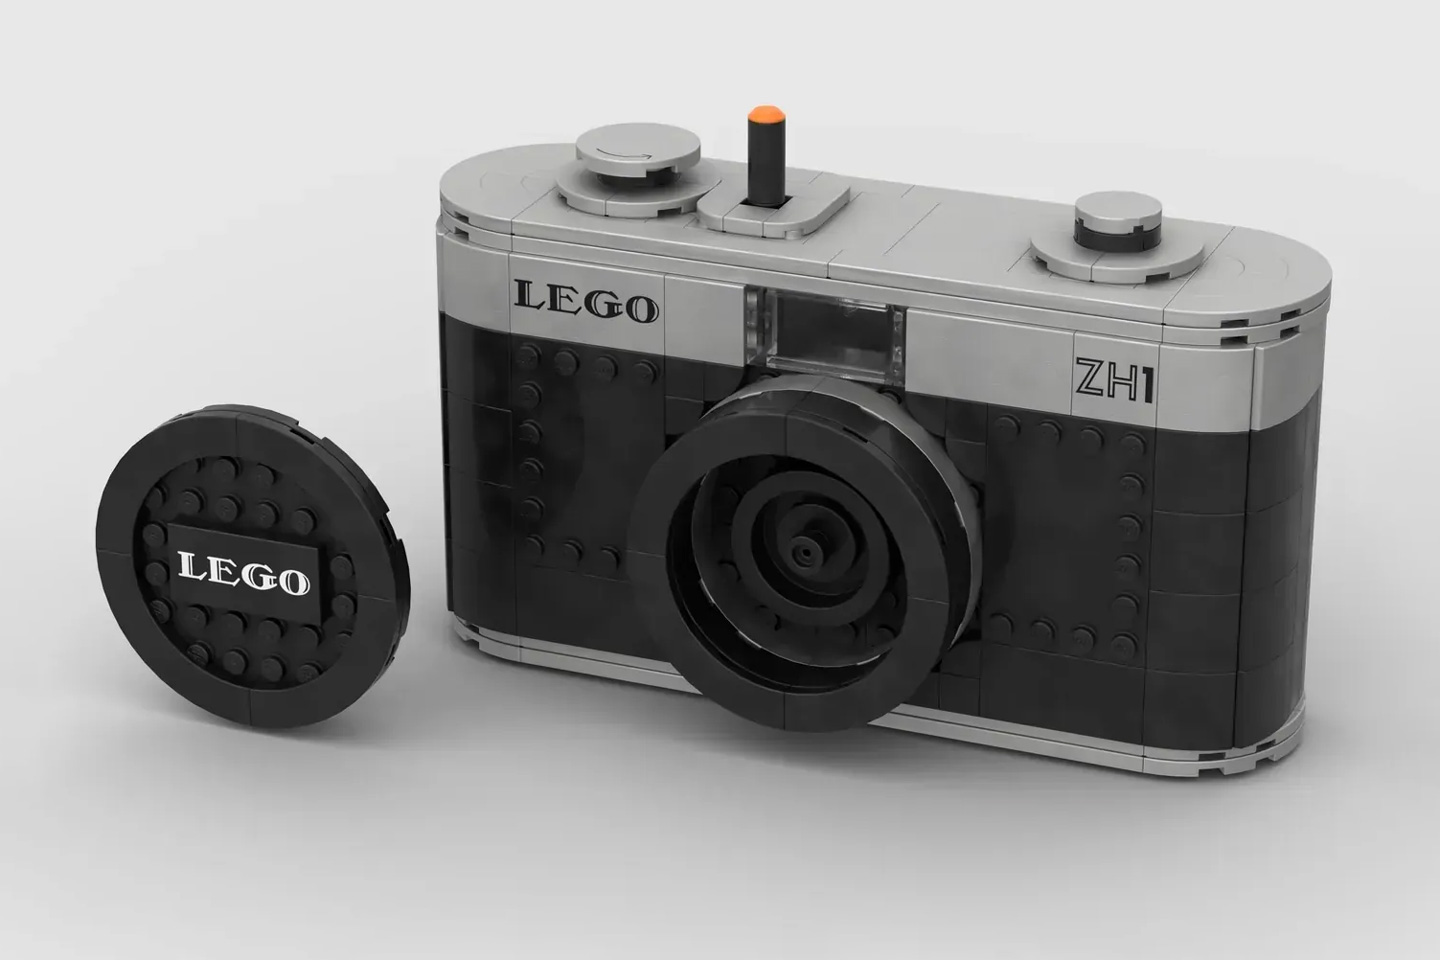 #This functional LEGO pinhole camera ACTUALLY clicks vintage photos on 35mm film